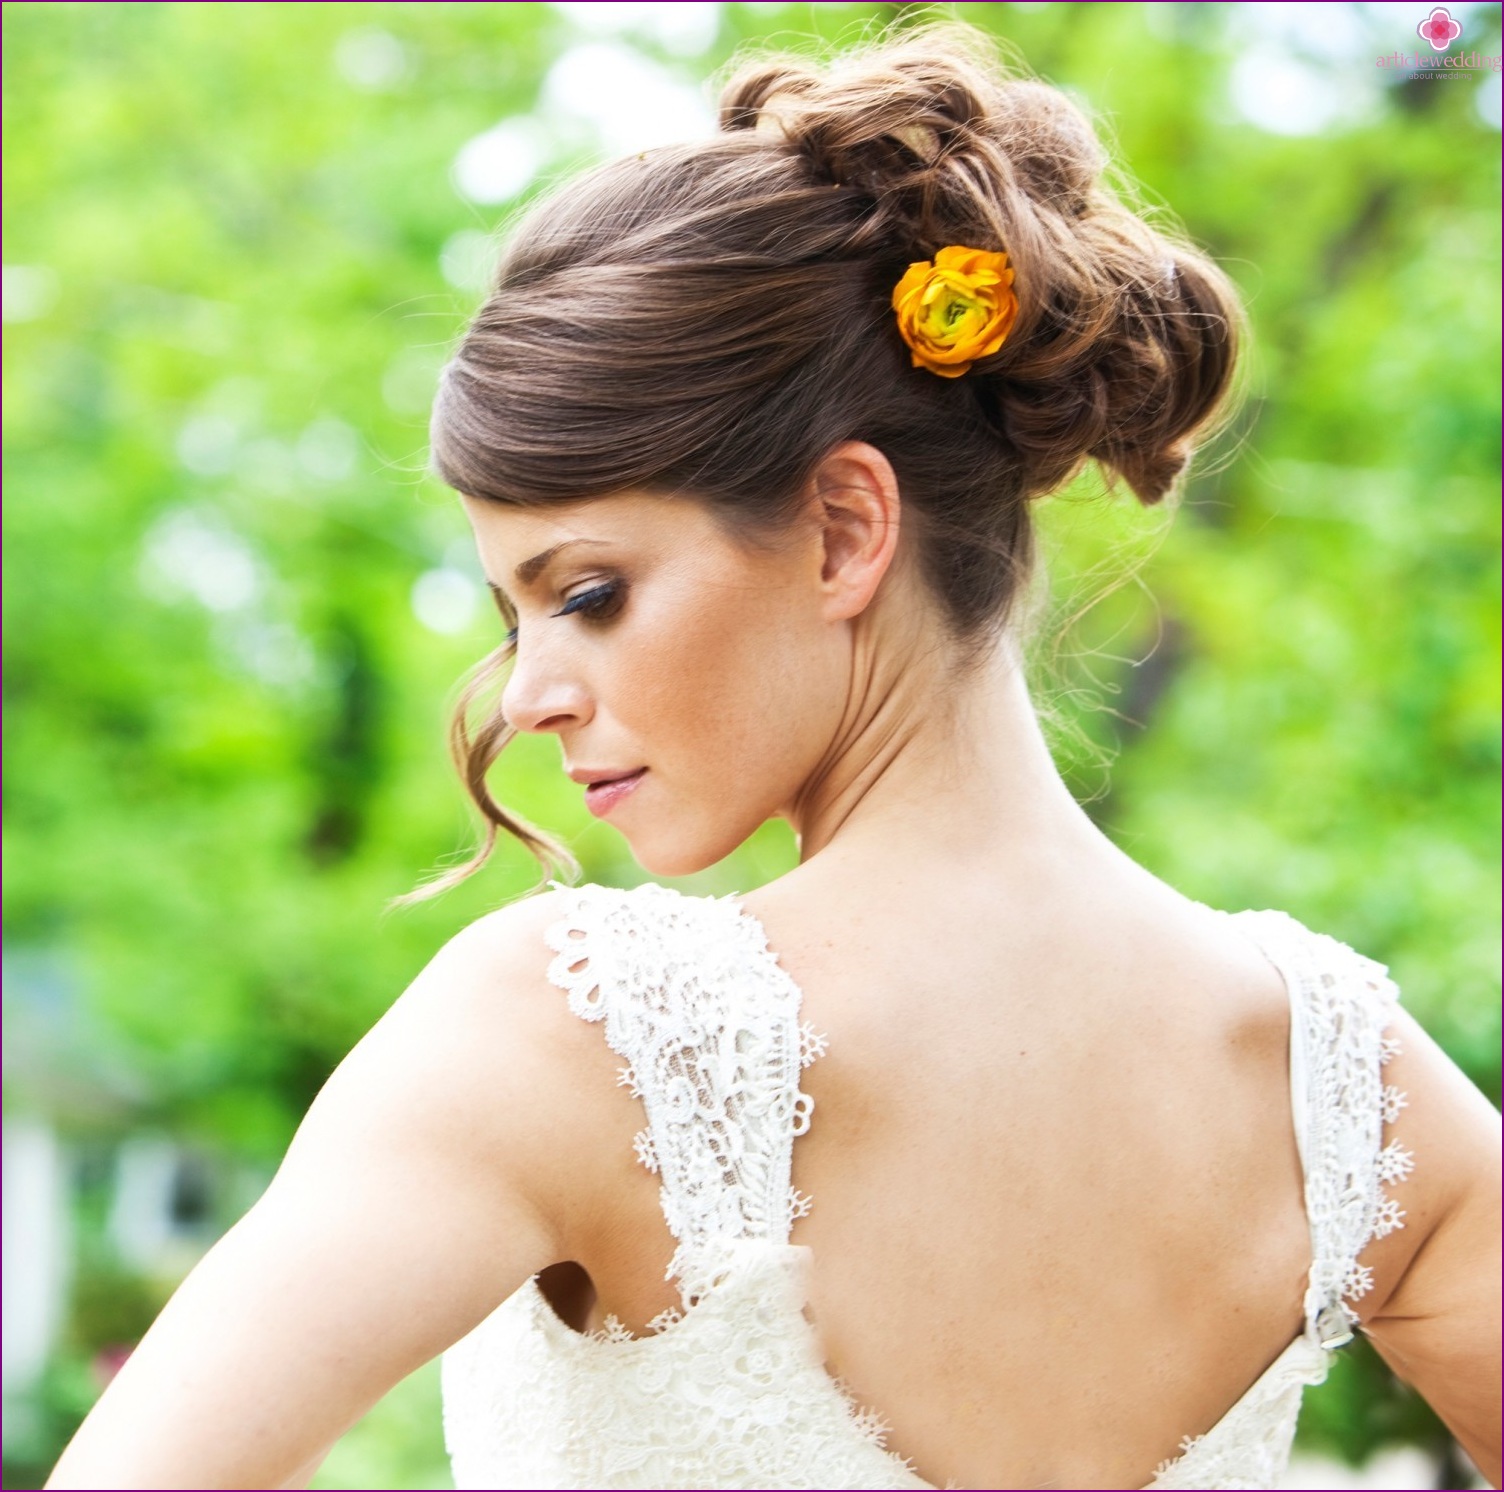 Decoration for bride hairstyle